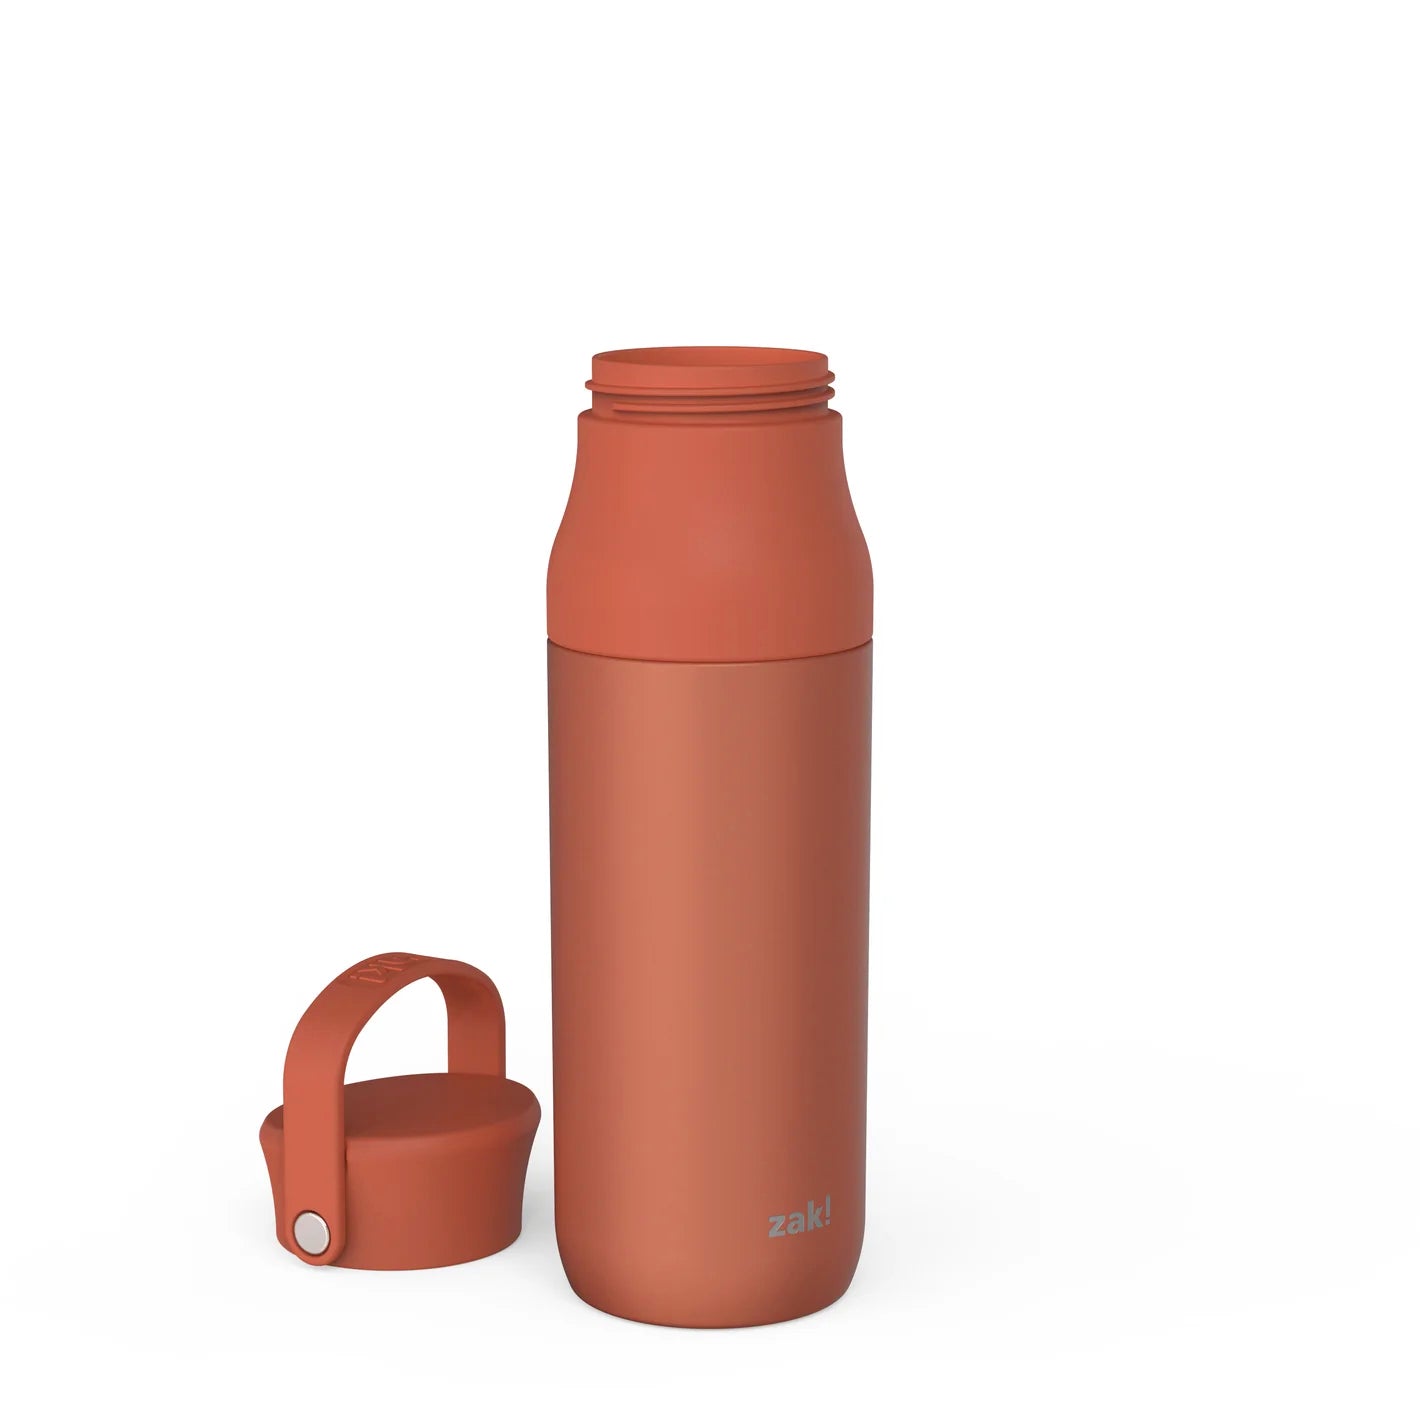 REPLACEMENT LID FOR ZAK! 20oz LEAK PROOF TRAVEL STAINLESS STEEL WATER BOTTLE